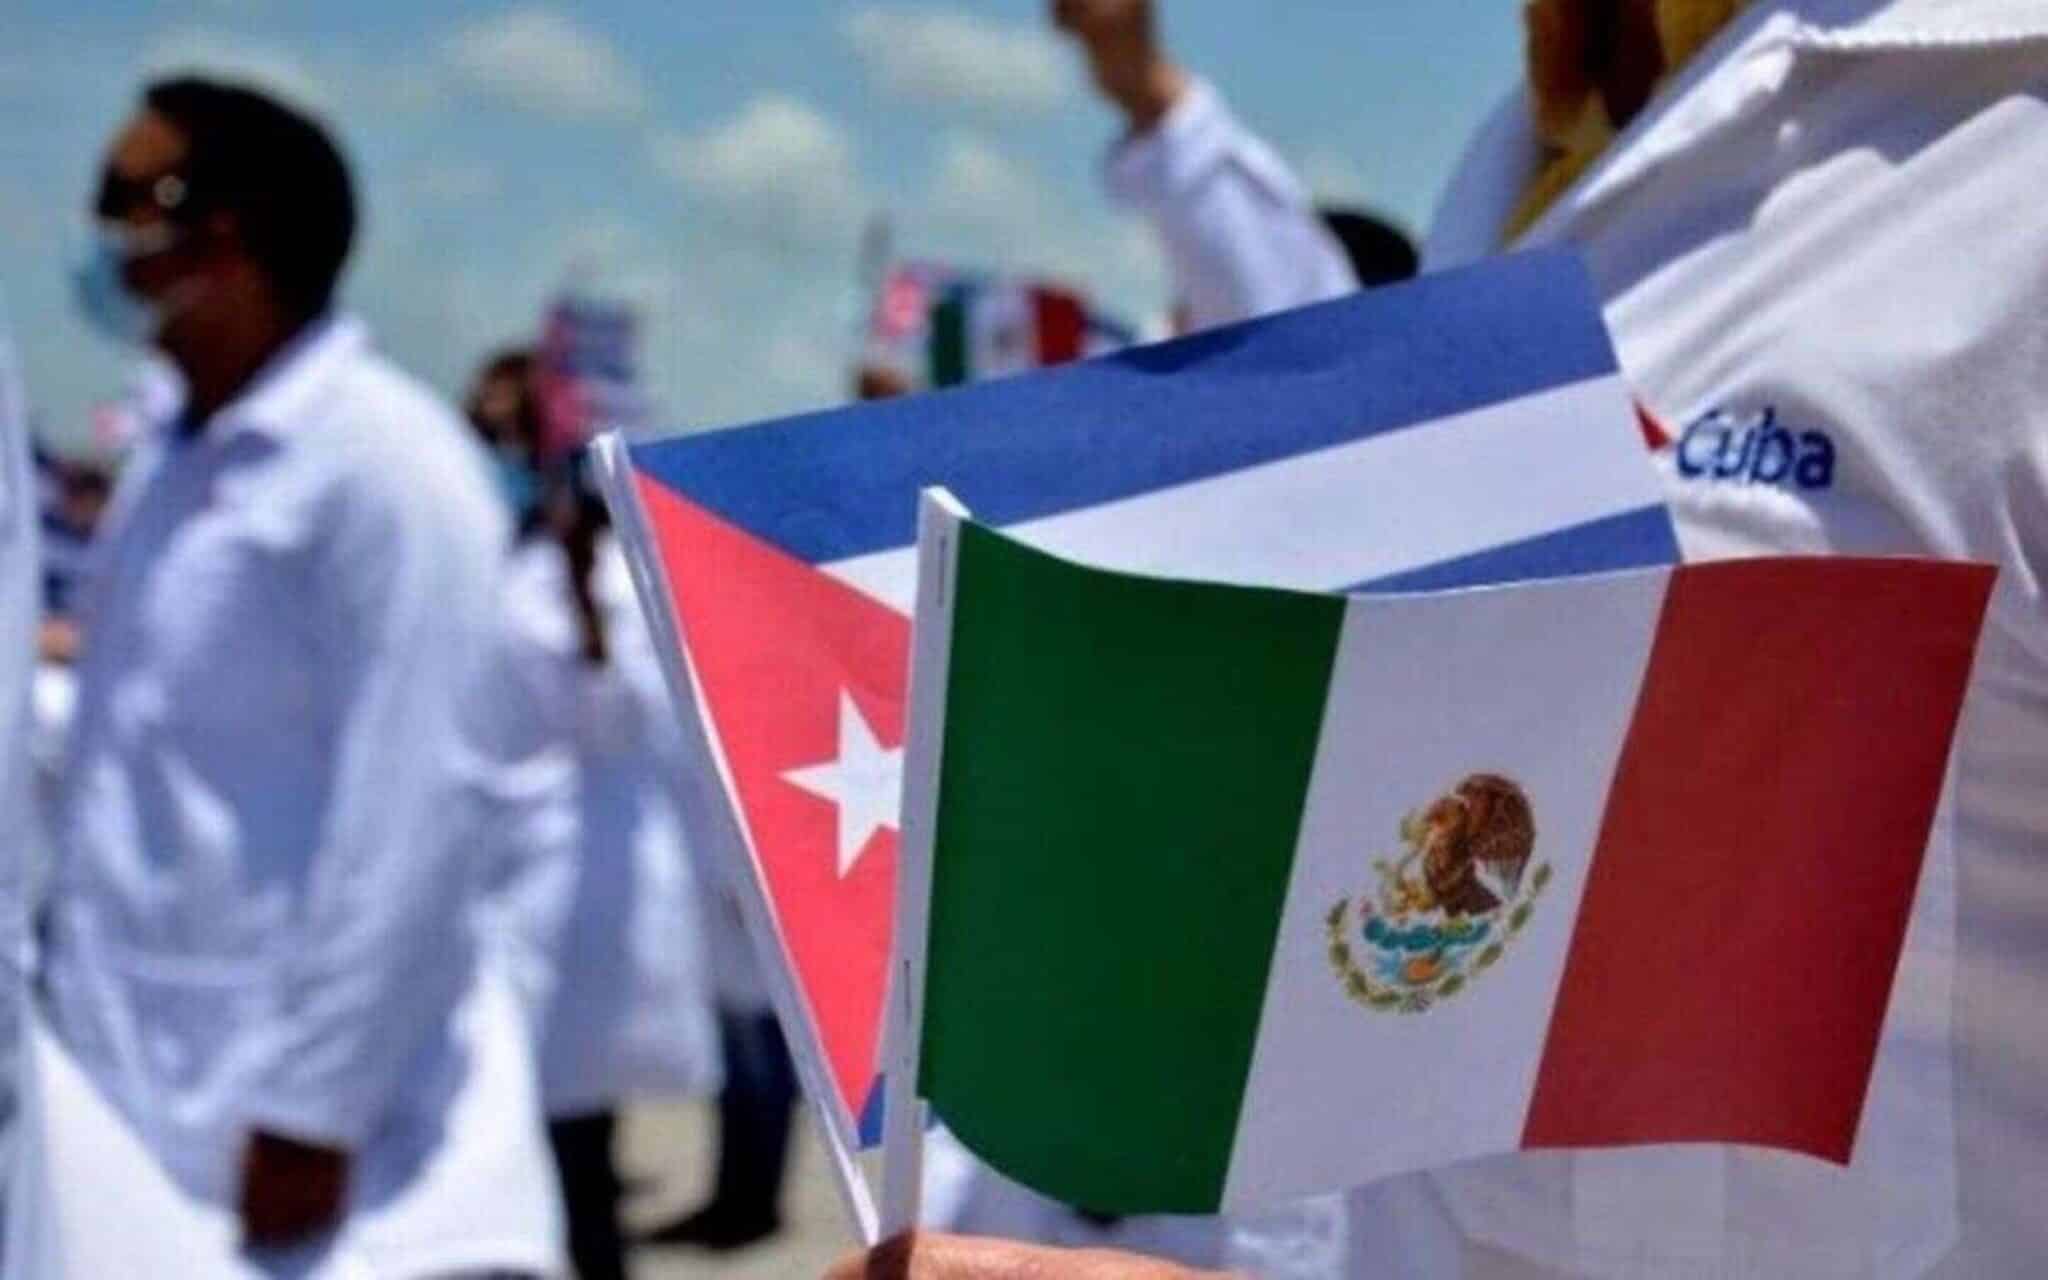 A Cuban doctor holding flags of Mexico and Cuba during a public ceremony. File photo.